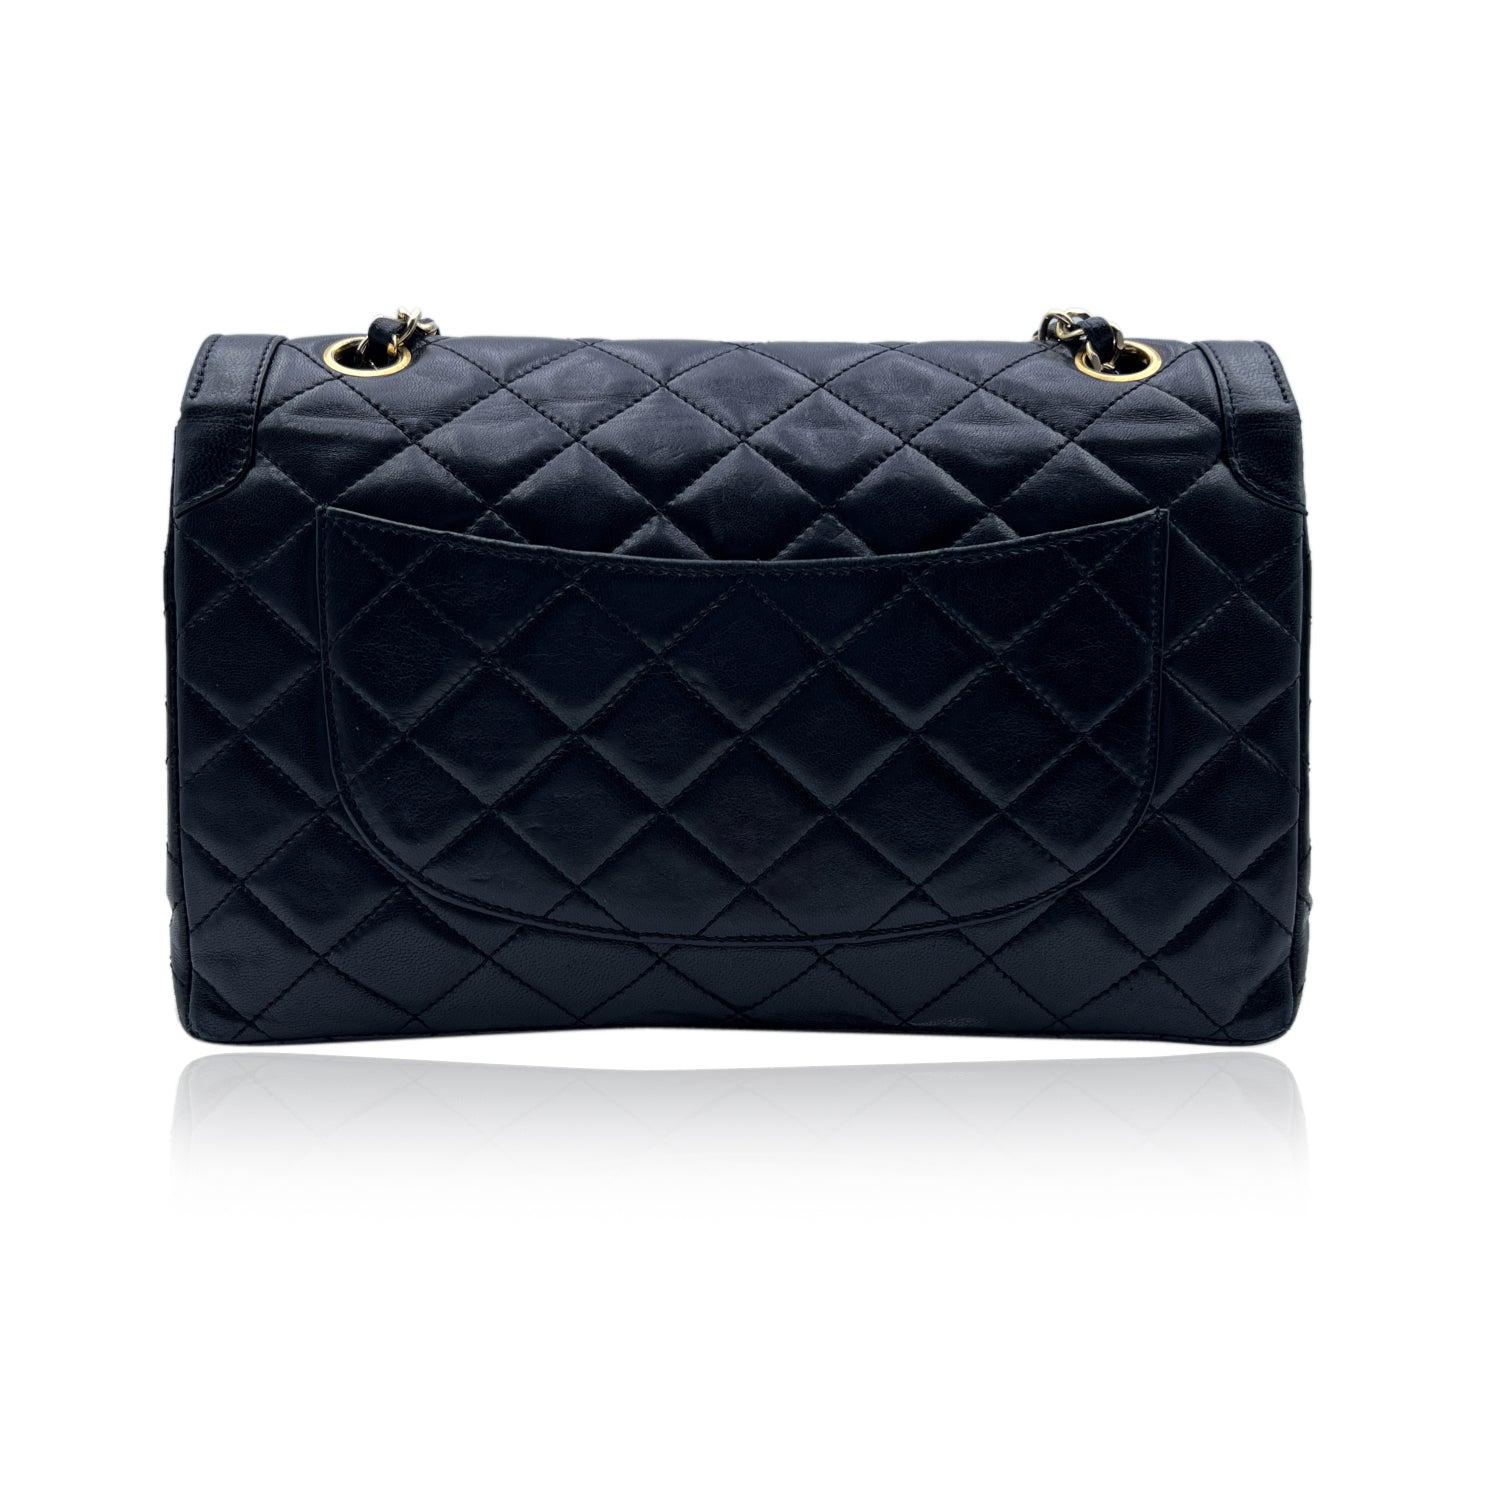 Black Chanel Vintage Quilted Leather Smooth Trim Timeless Double Flap Bag